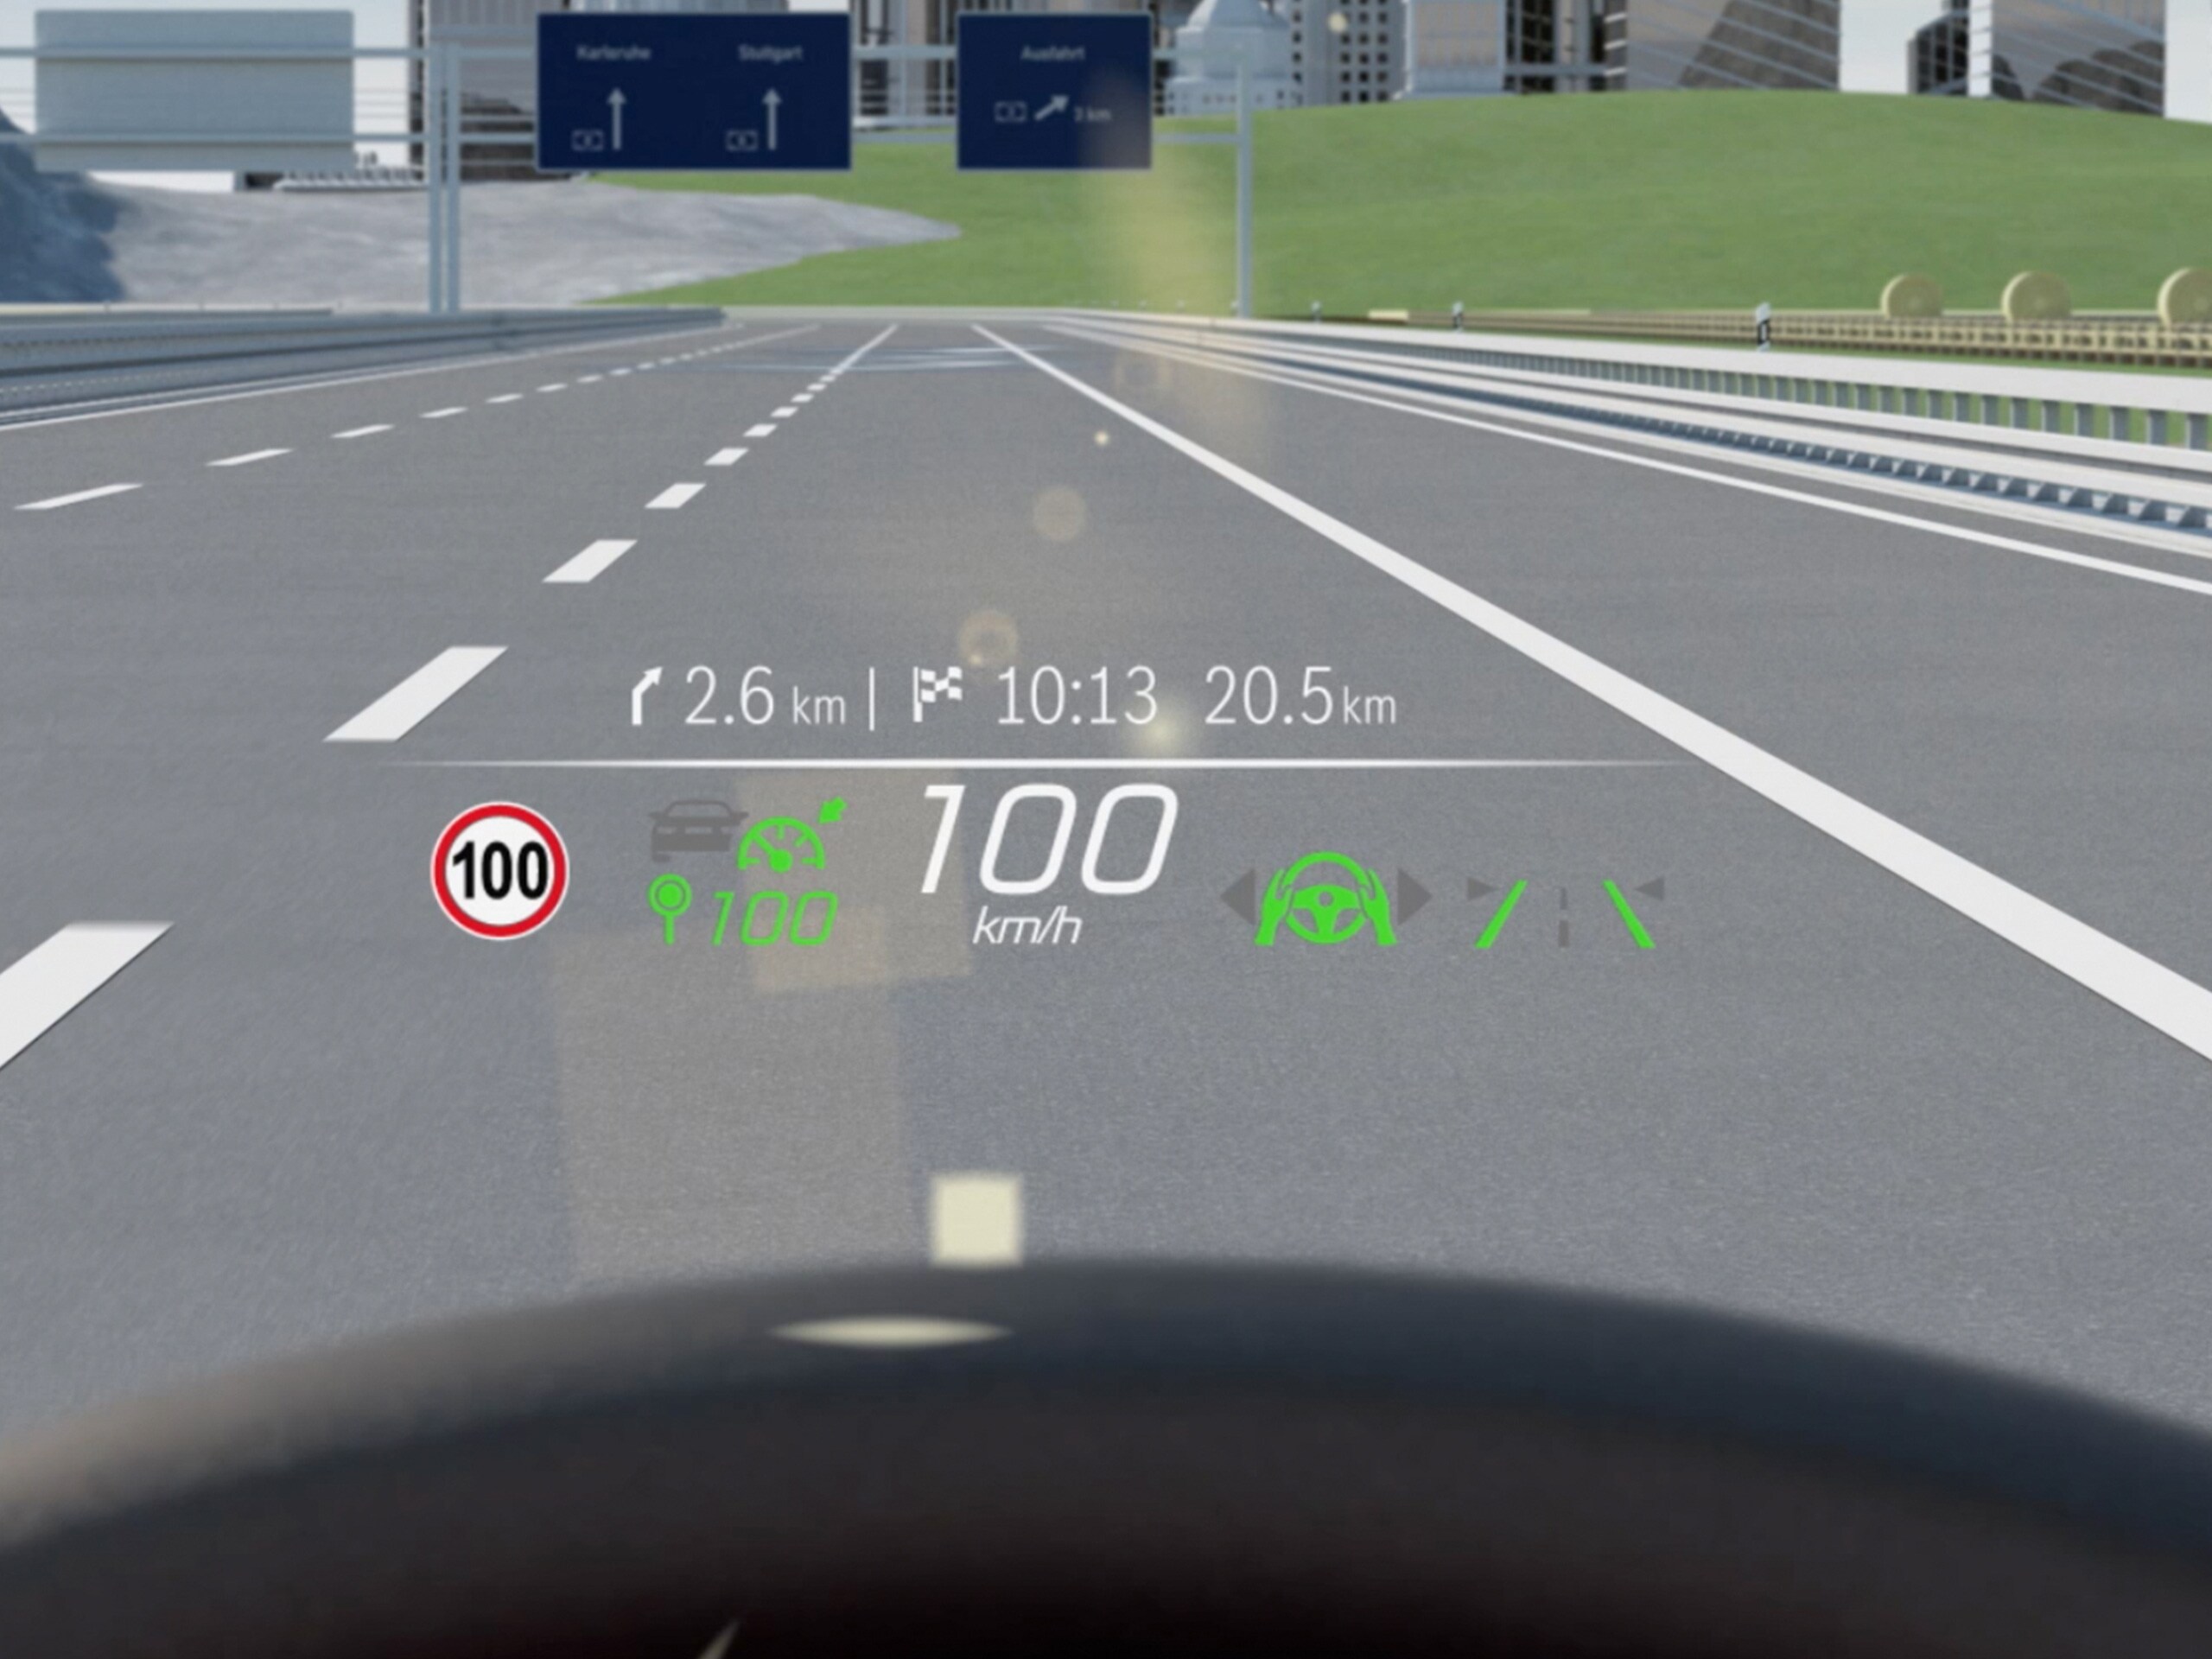 The video shows how the head-up display in the Mercedes-Benz C-Class Saloon works.